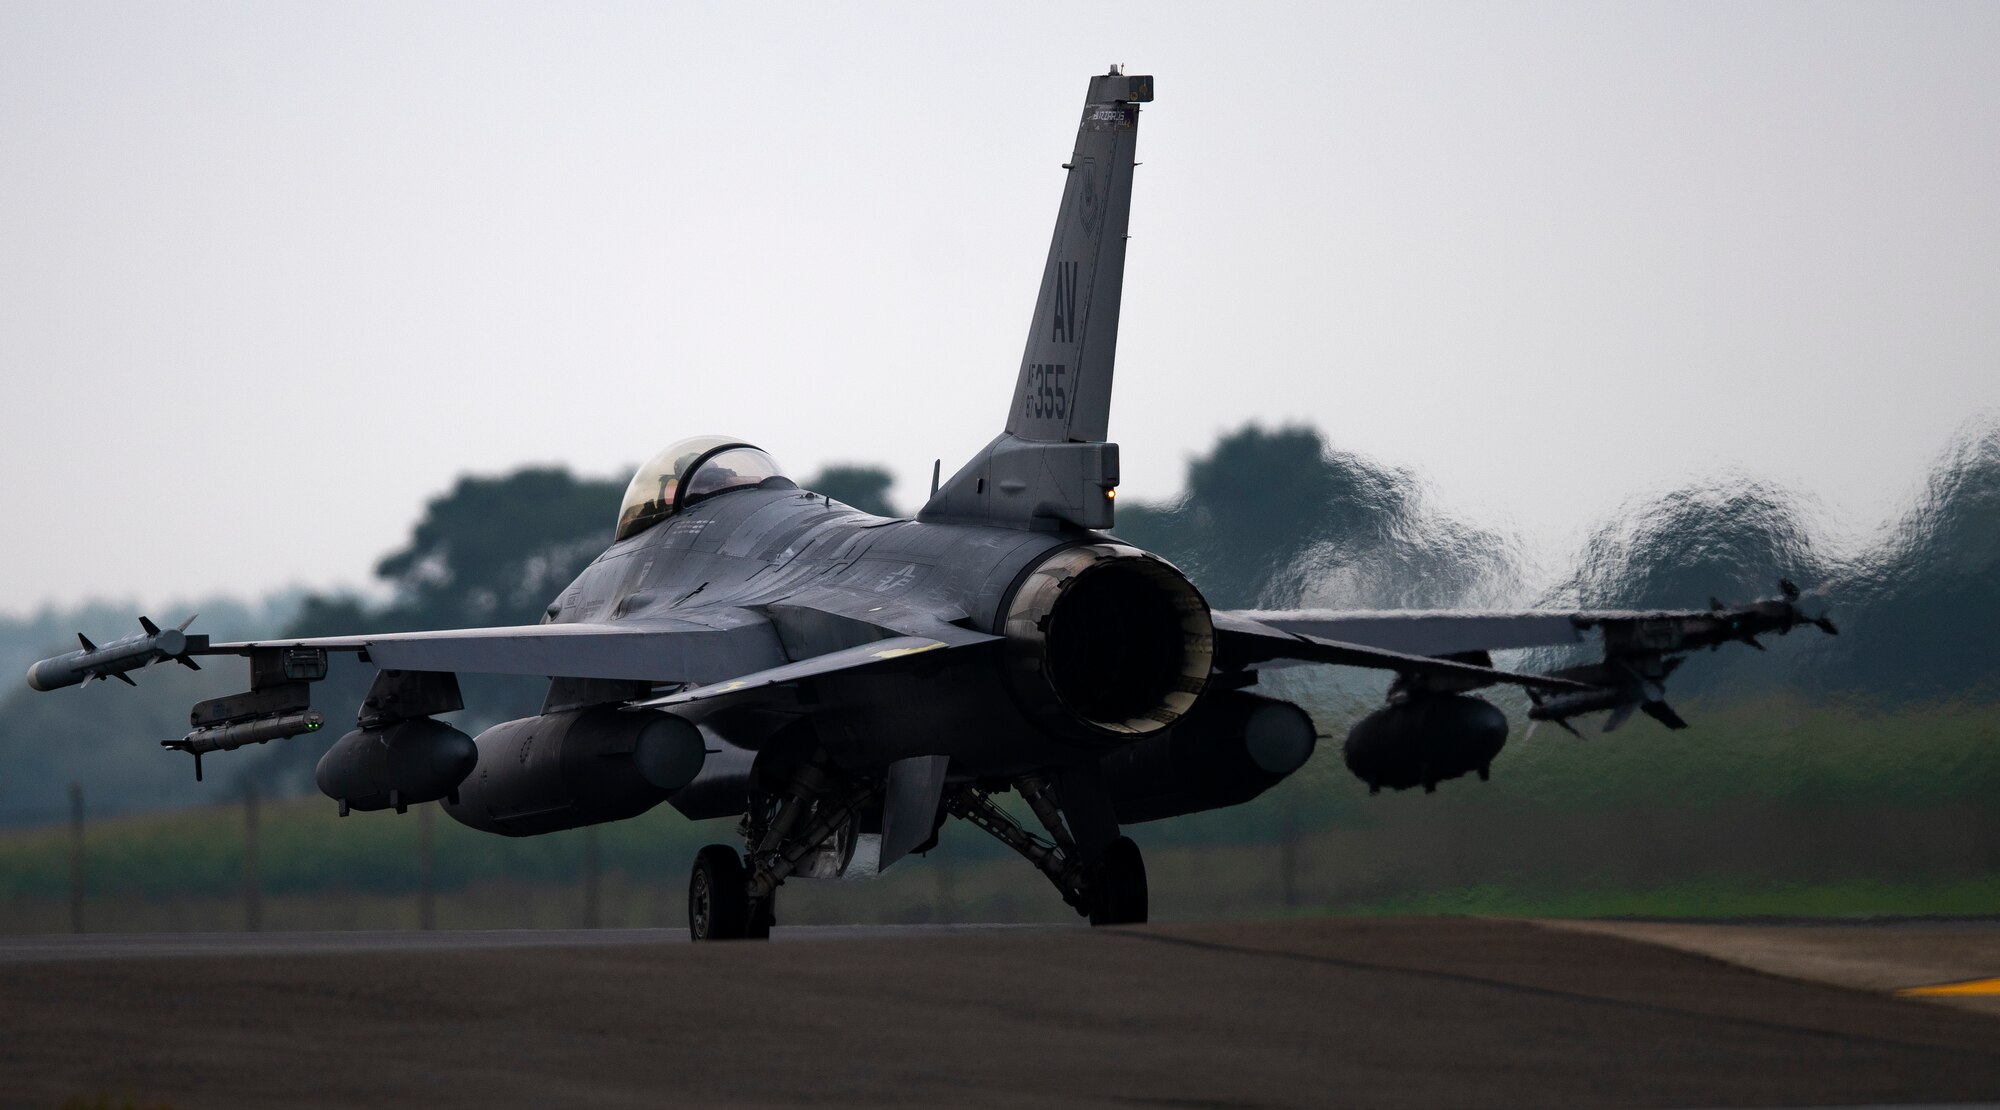 A U.S Air Force F-16 Fighting Falcon assigned to the 510th Fighter Squadron, Aviano Air Base, Italy, arrives at Royal Air Force Lakenheath, England, Aug. 28, 2020.  Aircraft and Airmen from the 510th FS are participating in a flying training deployment event to enhance interoperability, maintain joint readiness and strengthen relationships with regional allies and partners. (U.S. Air Force photo by Airman 1st Class Jessi Monte)